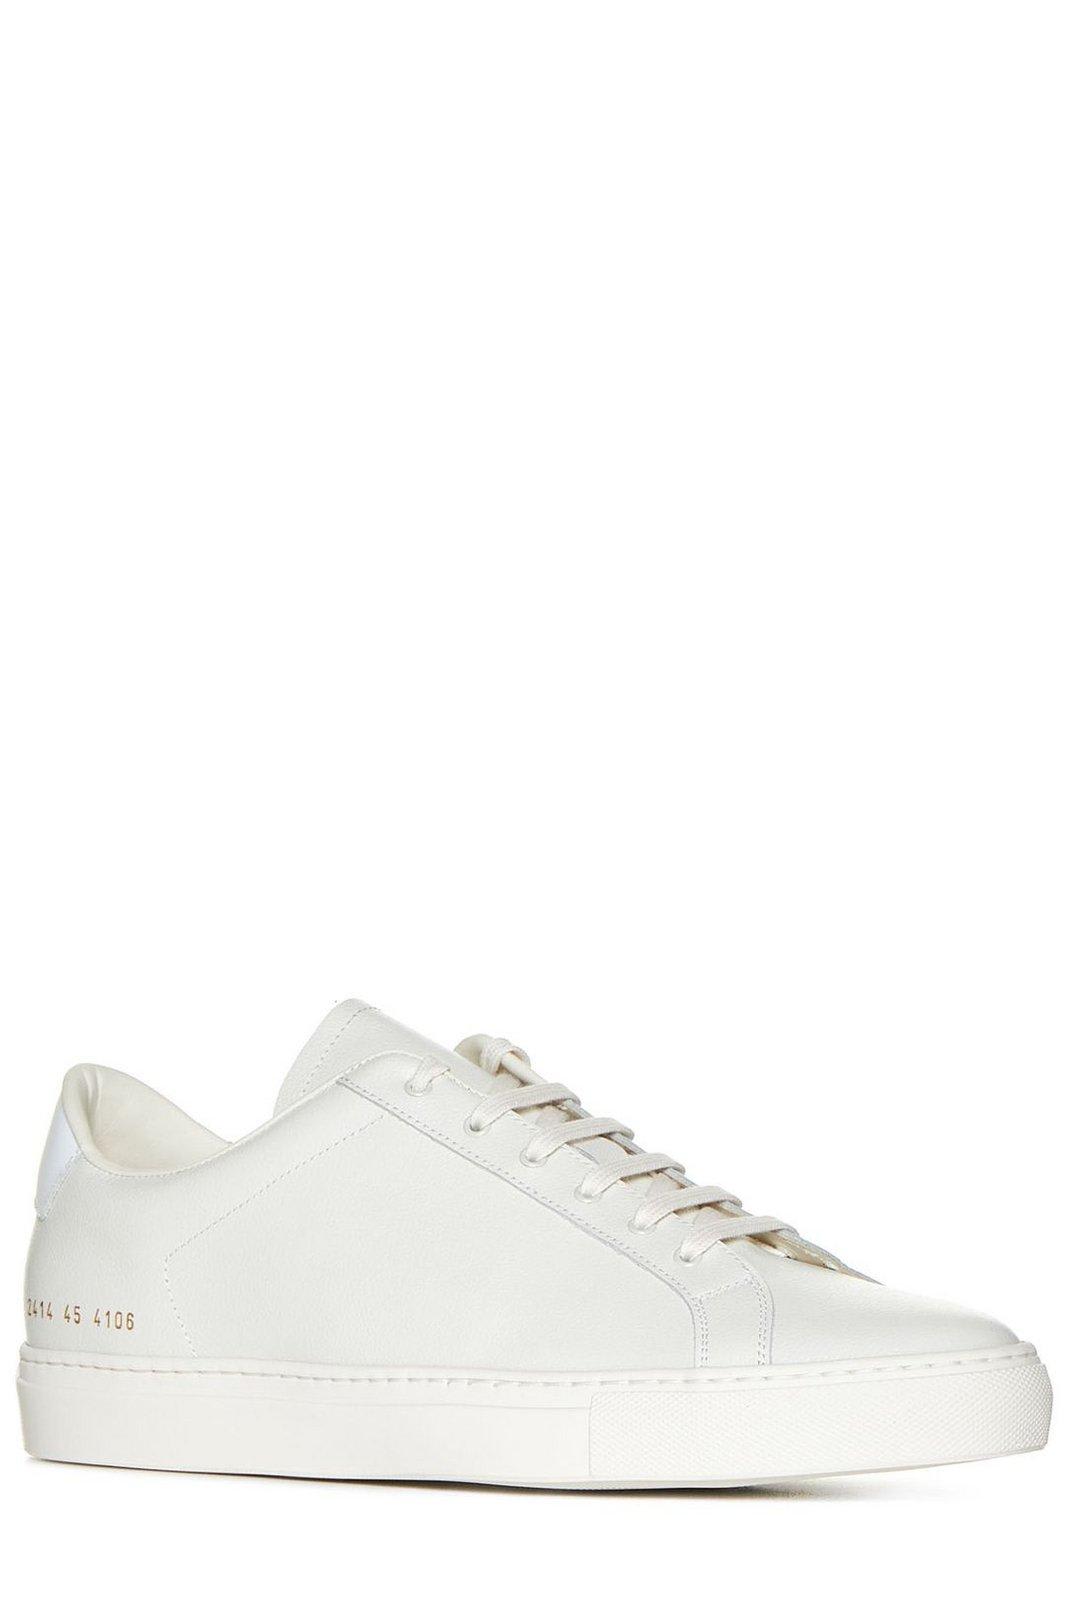 Shop Common Projects Retro Bumpy Sneakers In Vintage White White (white)